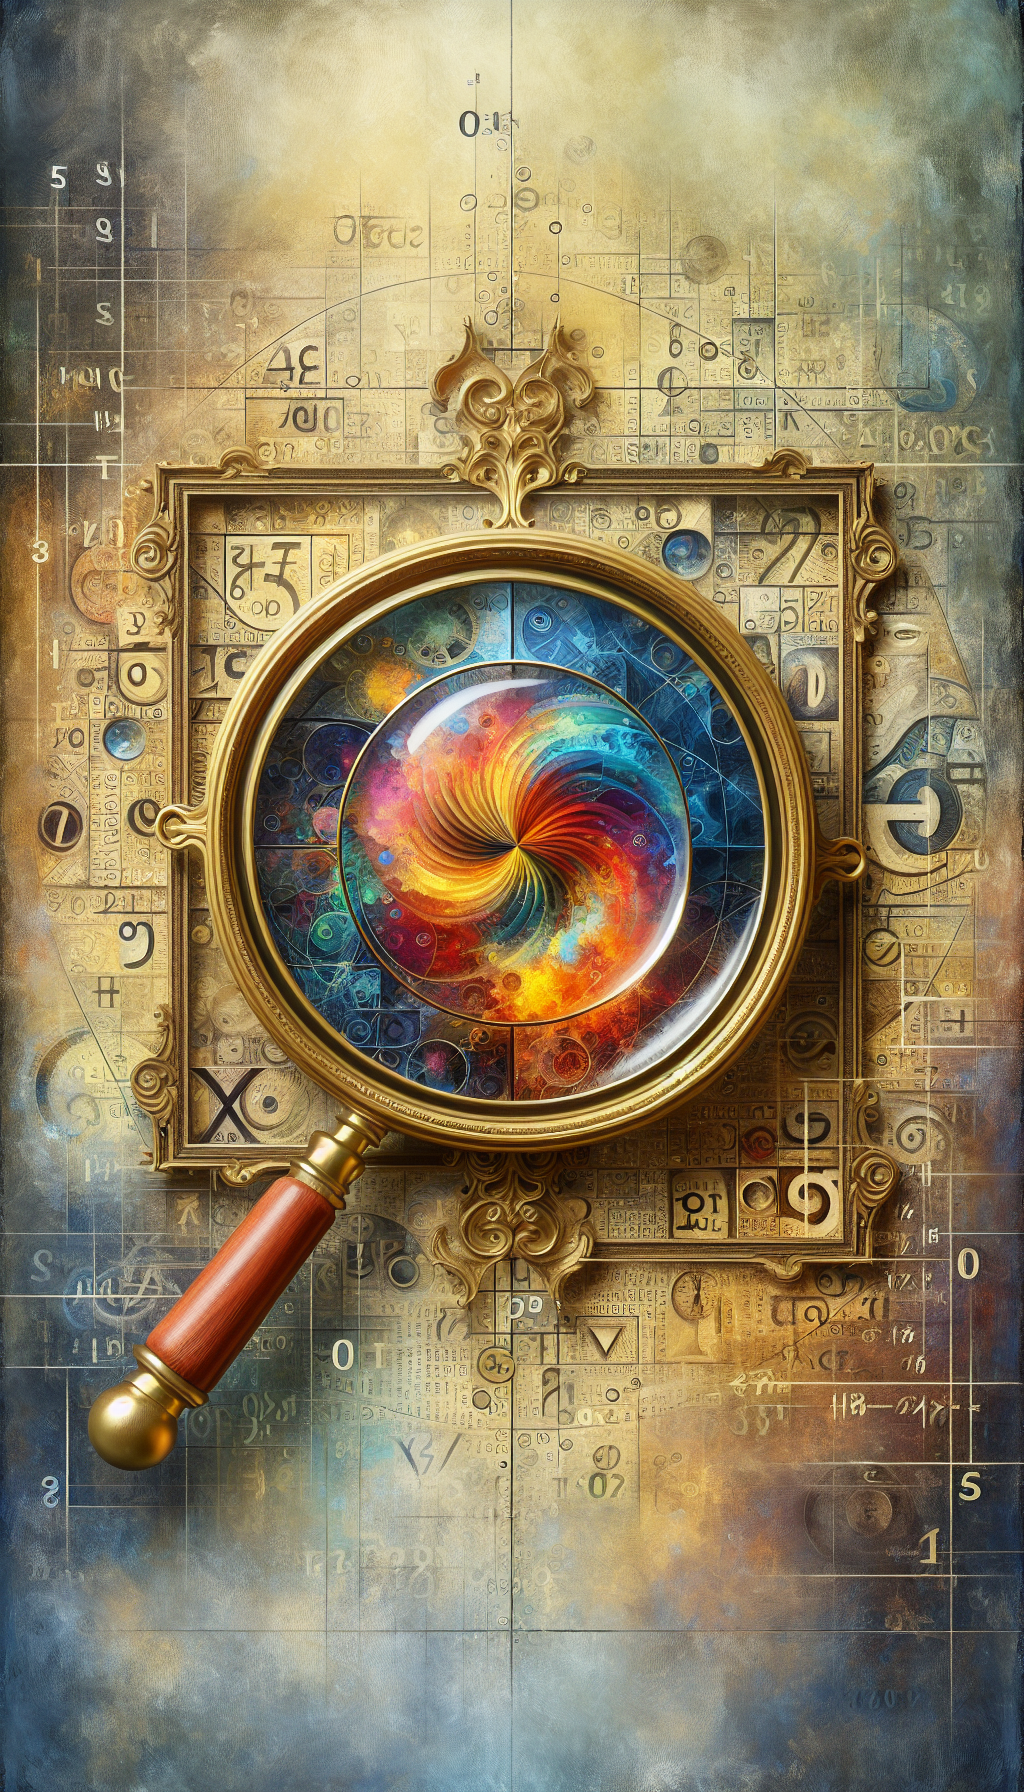 An illustration depicts an ornate magnifying glass framed by a classical gold leaf picture frame, through which a vibrant, abstract painting is in sharp focus. A subtle background of swirling numbers and currency symbols hint at the analytical process of appraisal behind the subjective beauty of fine art, capturing the juxtaposition of art and its valuation.